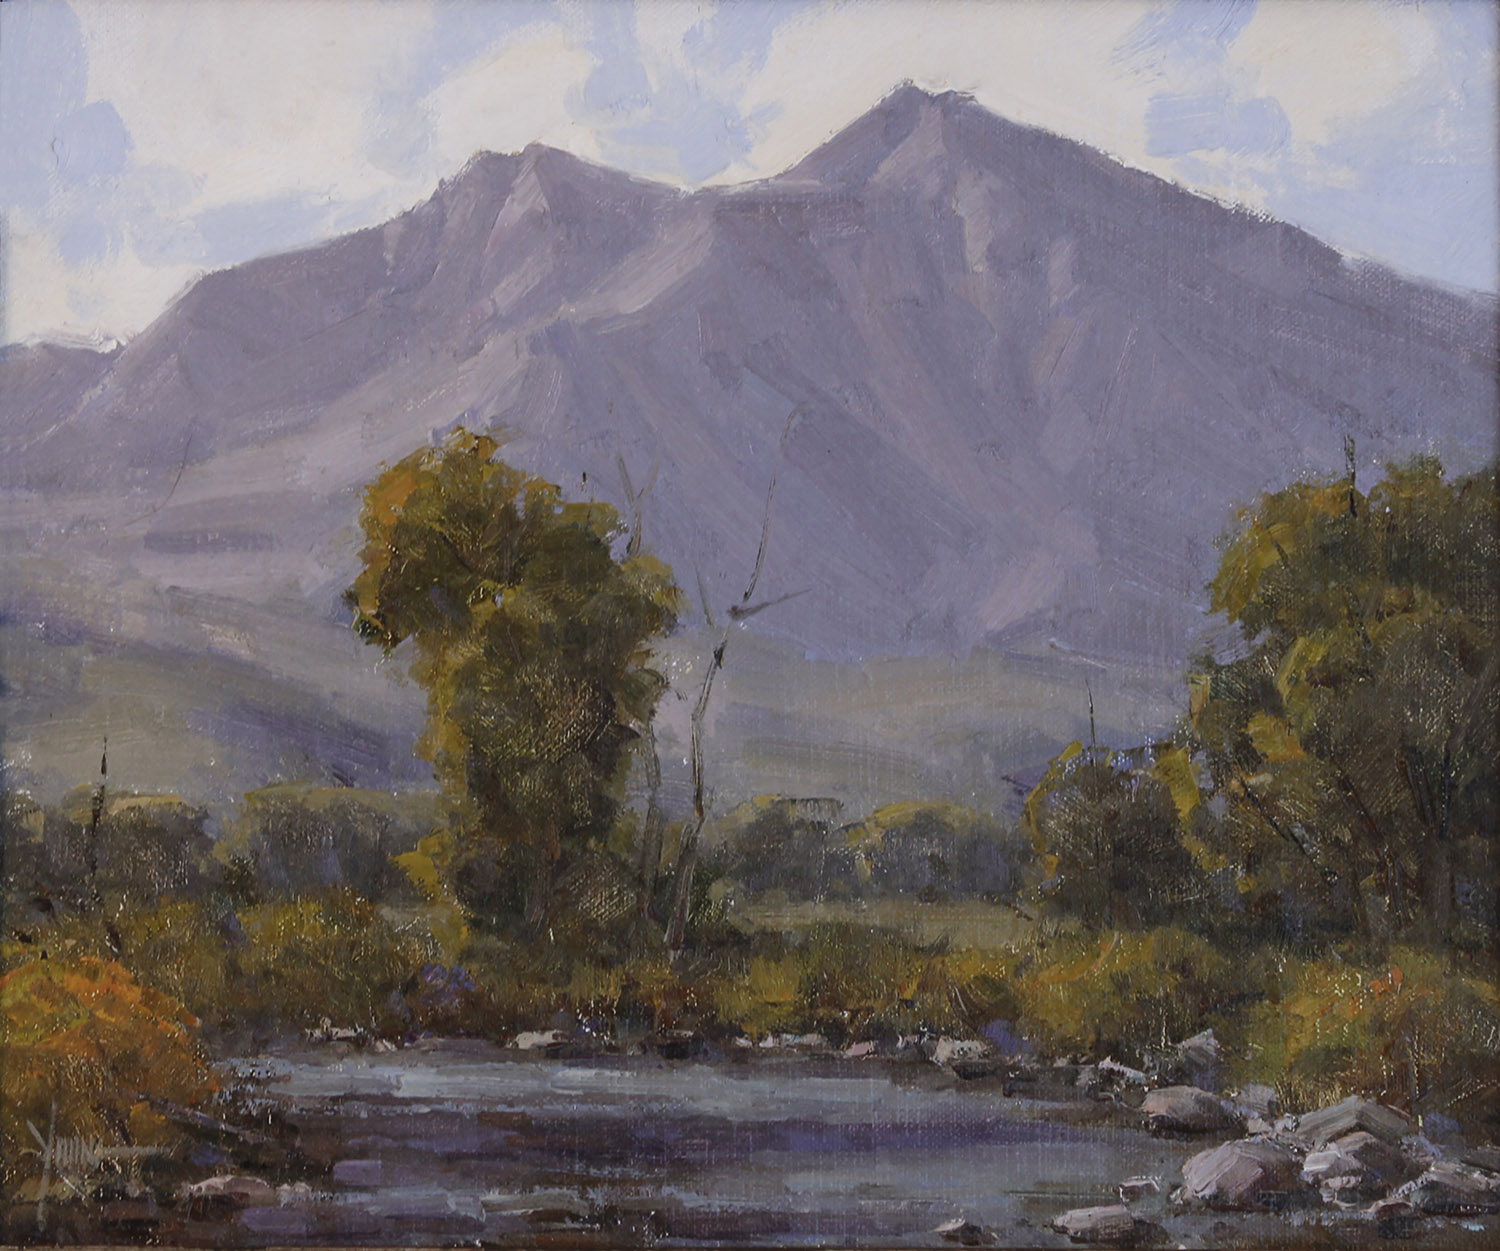 Landscape Paintings At Western Art Gallery, Western Landscape Paintings